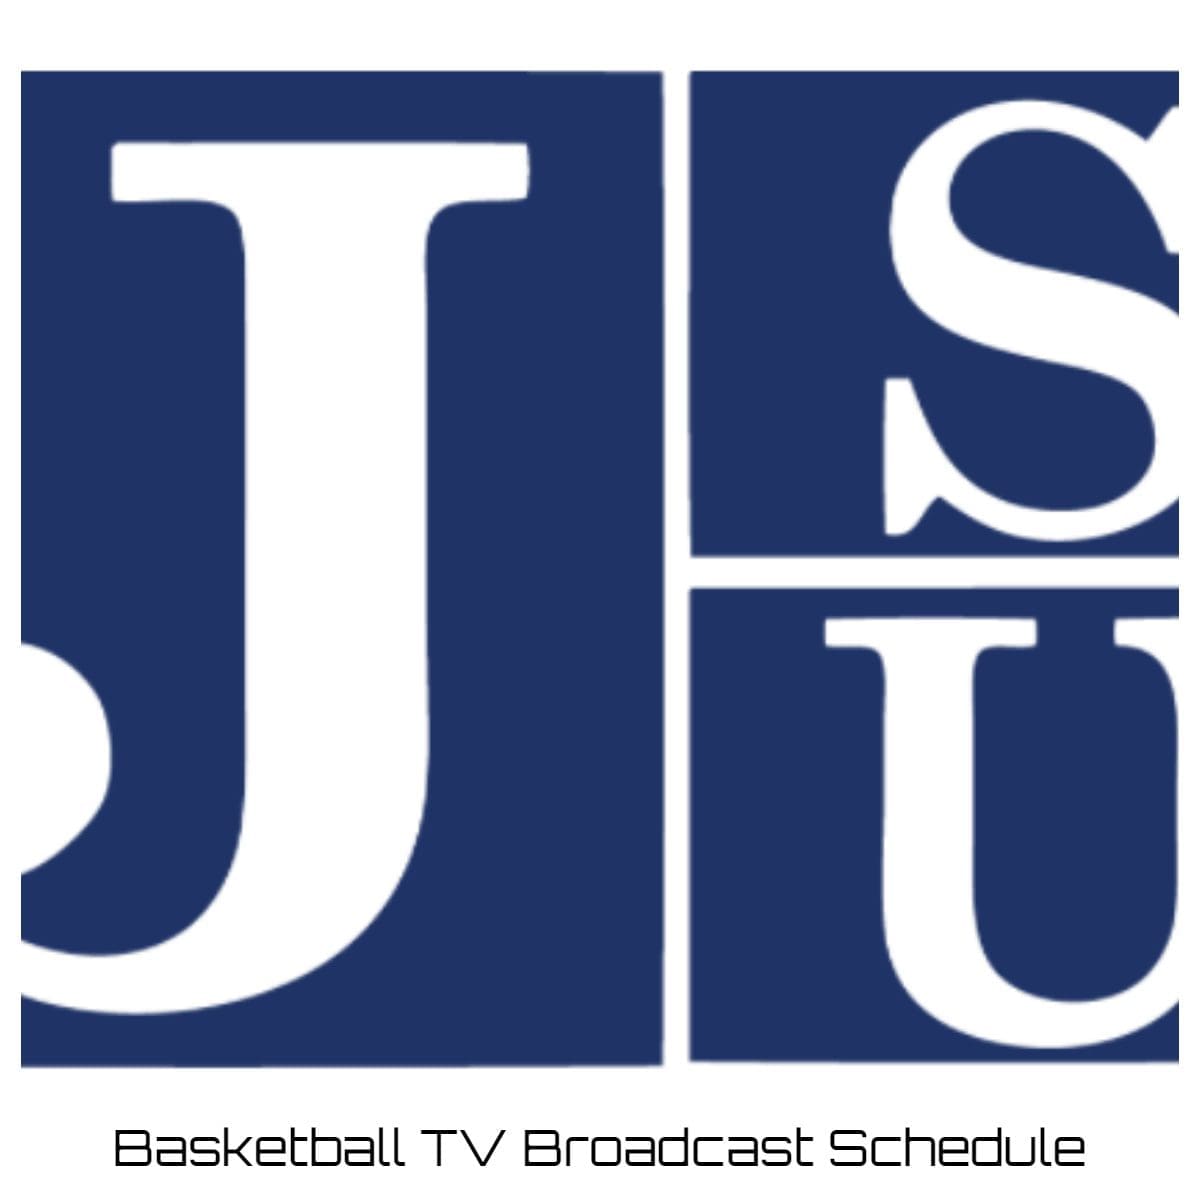 Jackson State Tigers Basketball TV Broadcast Schedule